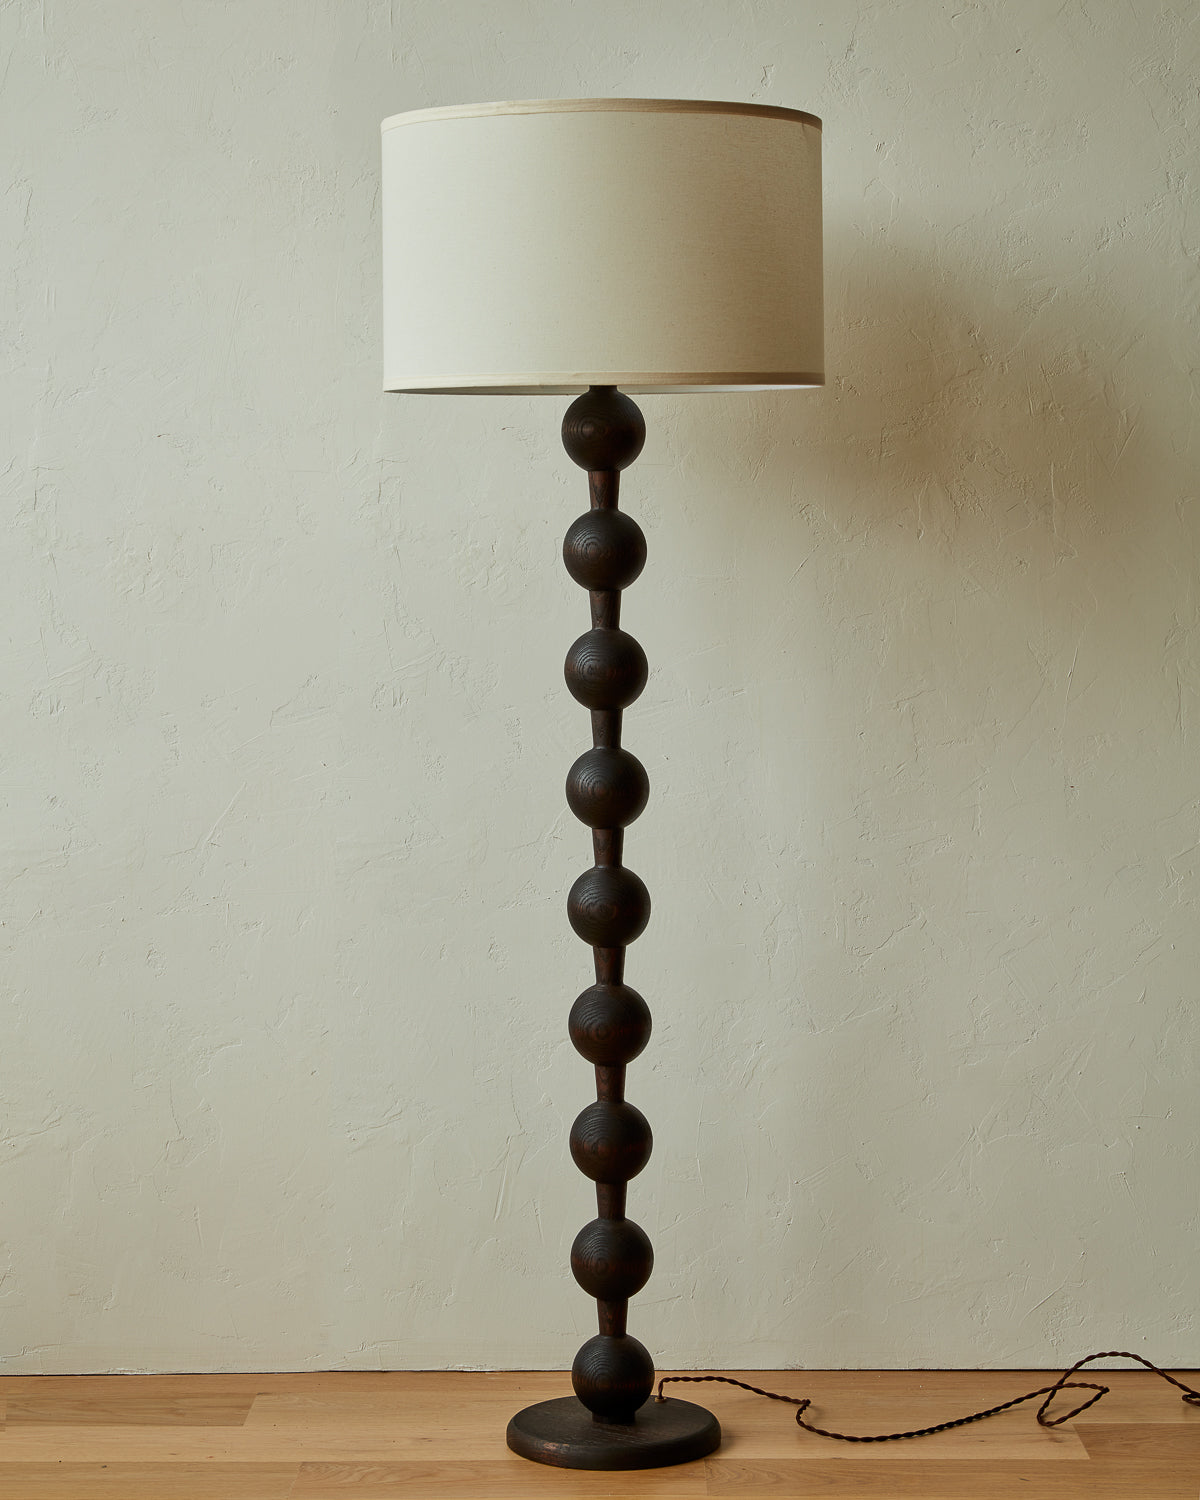 Tall sculptural solid wood floor lamp with barbell design in dark wash finish with white linen drum shade